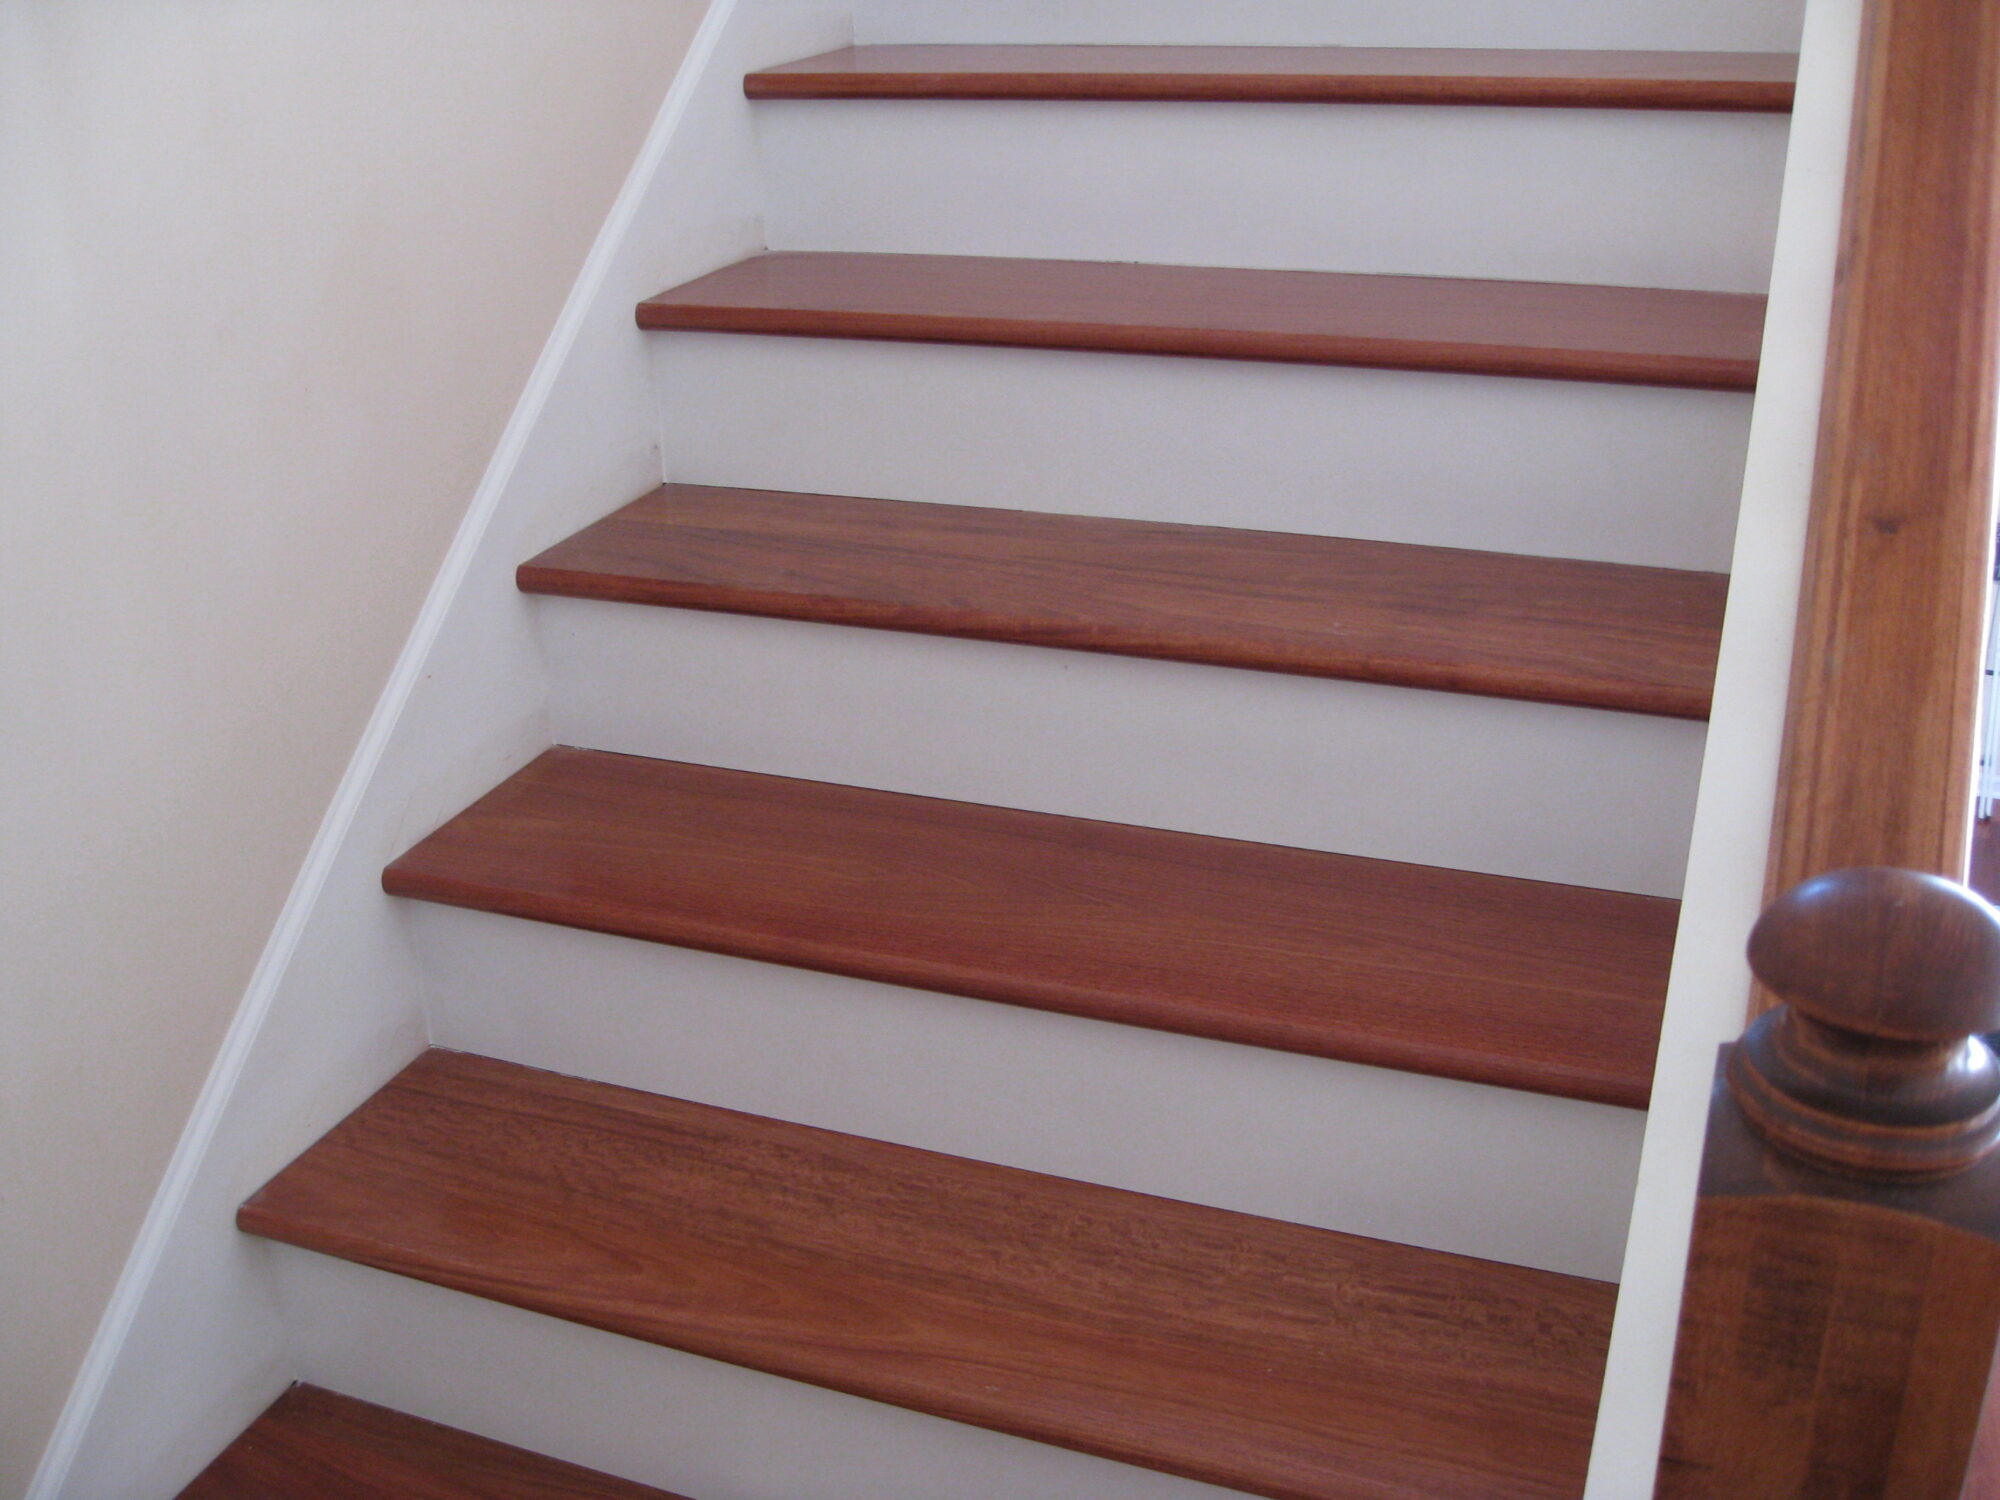 Factory Finished Santos Mahogany Treads with White Risers